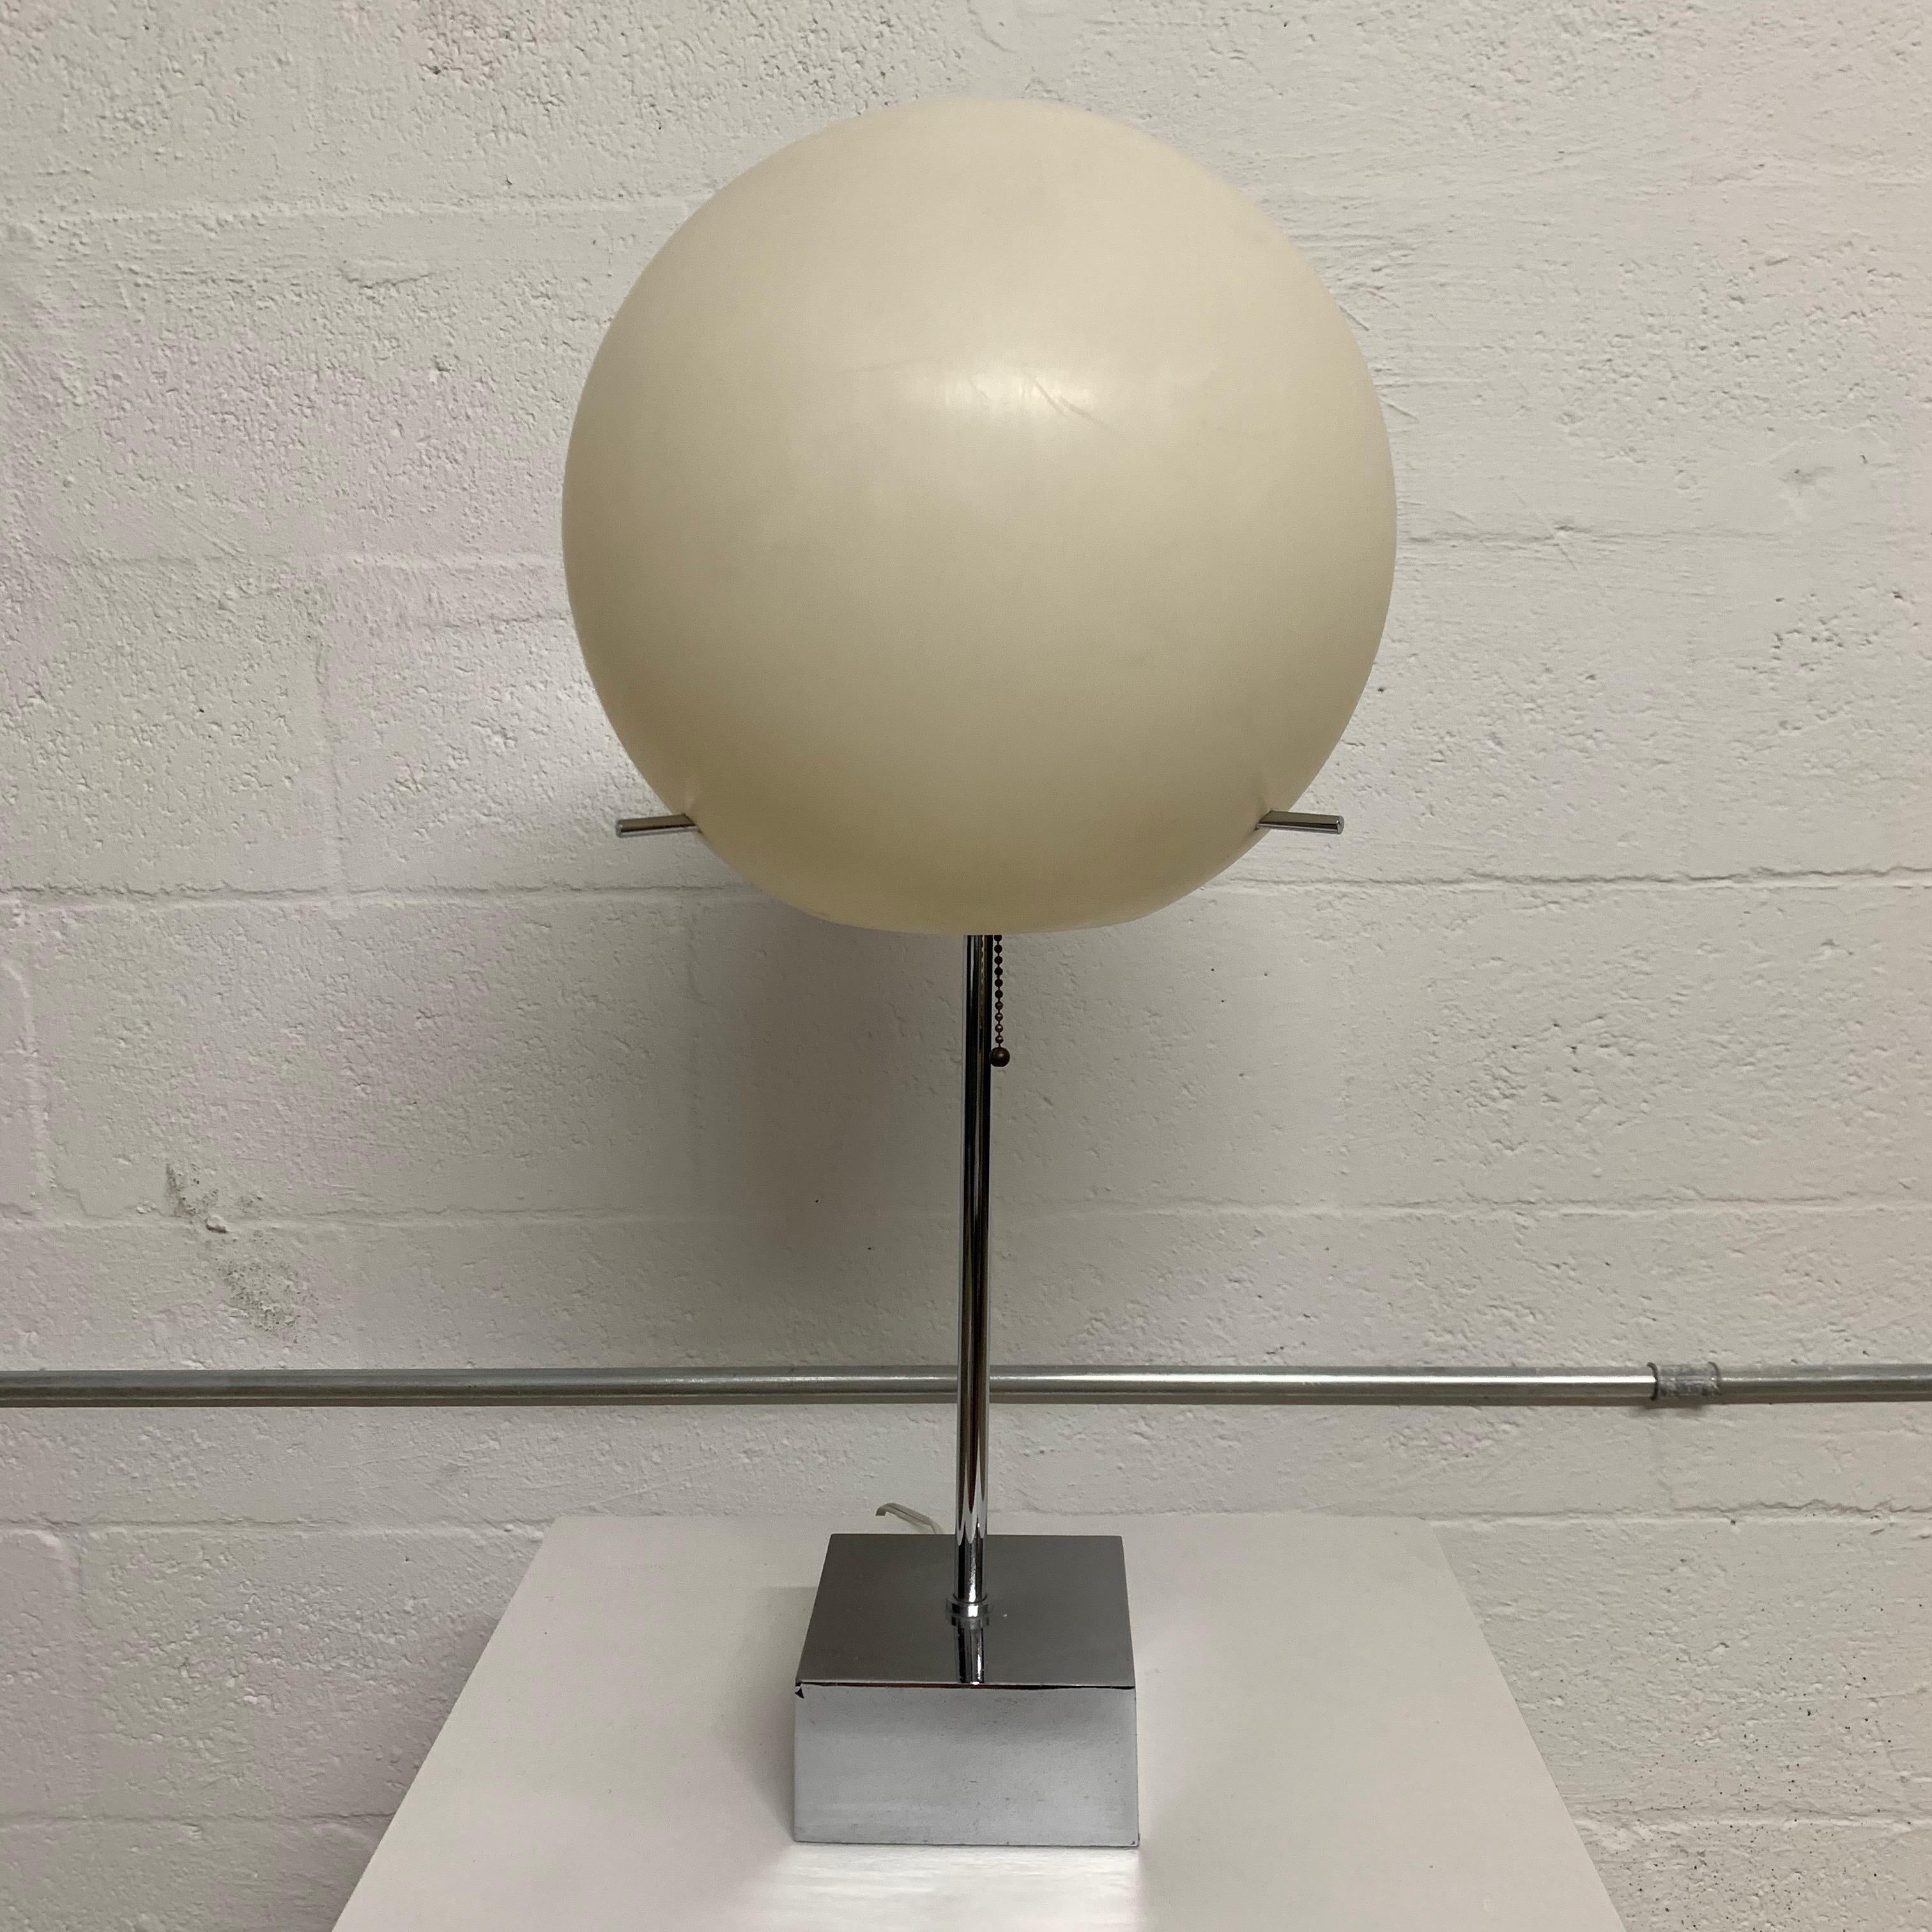 Iconic globe lamp rendered in chrome-plated steel white a white polyurethane globe suspended by three chrome rods designed by Paul Mayen for Habitat, UK, 1970s.